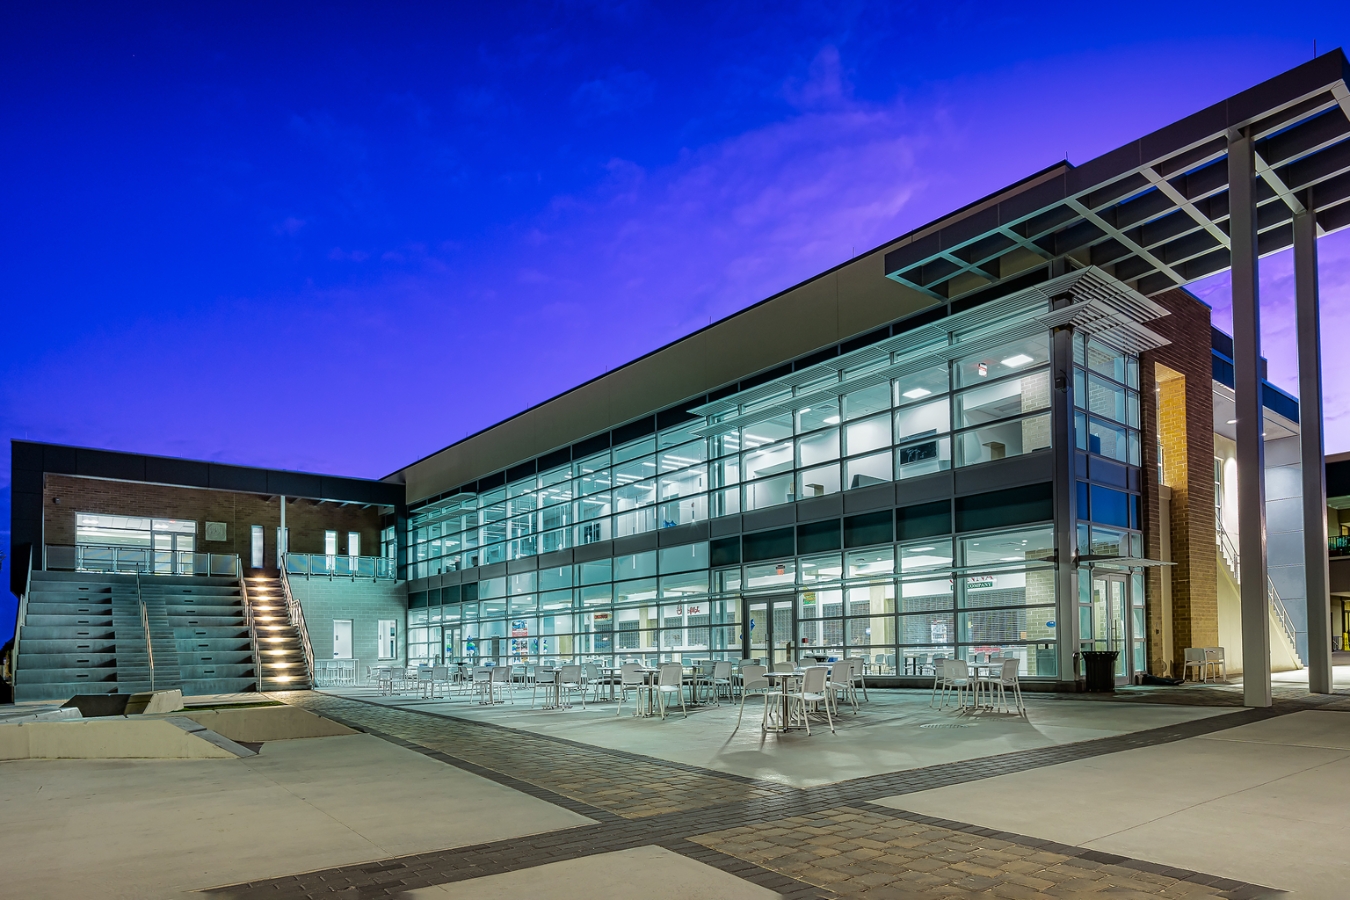 A wide shot of the Student Union (Bldg. 16) on the Melbourne Campus at night with a clear view of the food court and conference rooms inside.